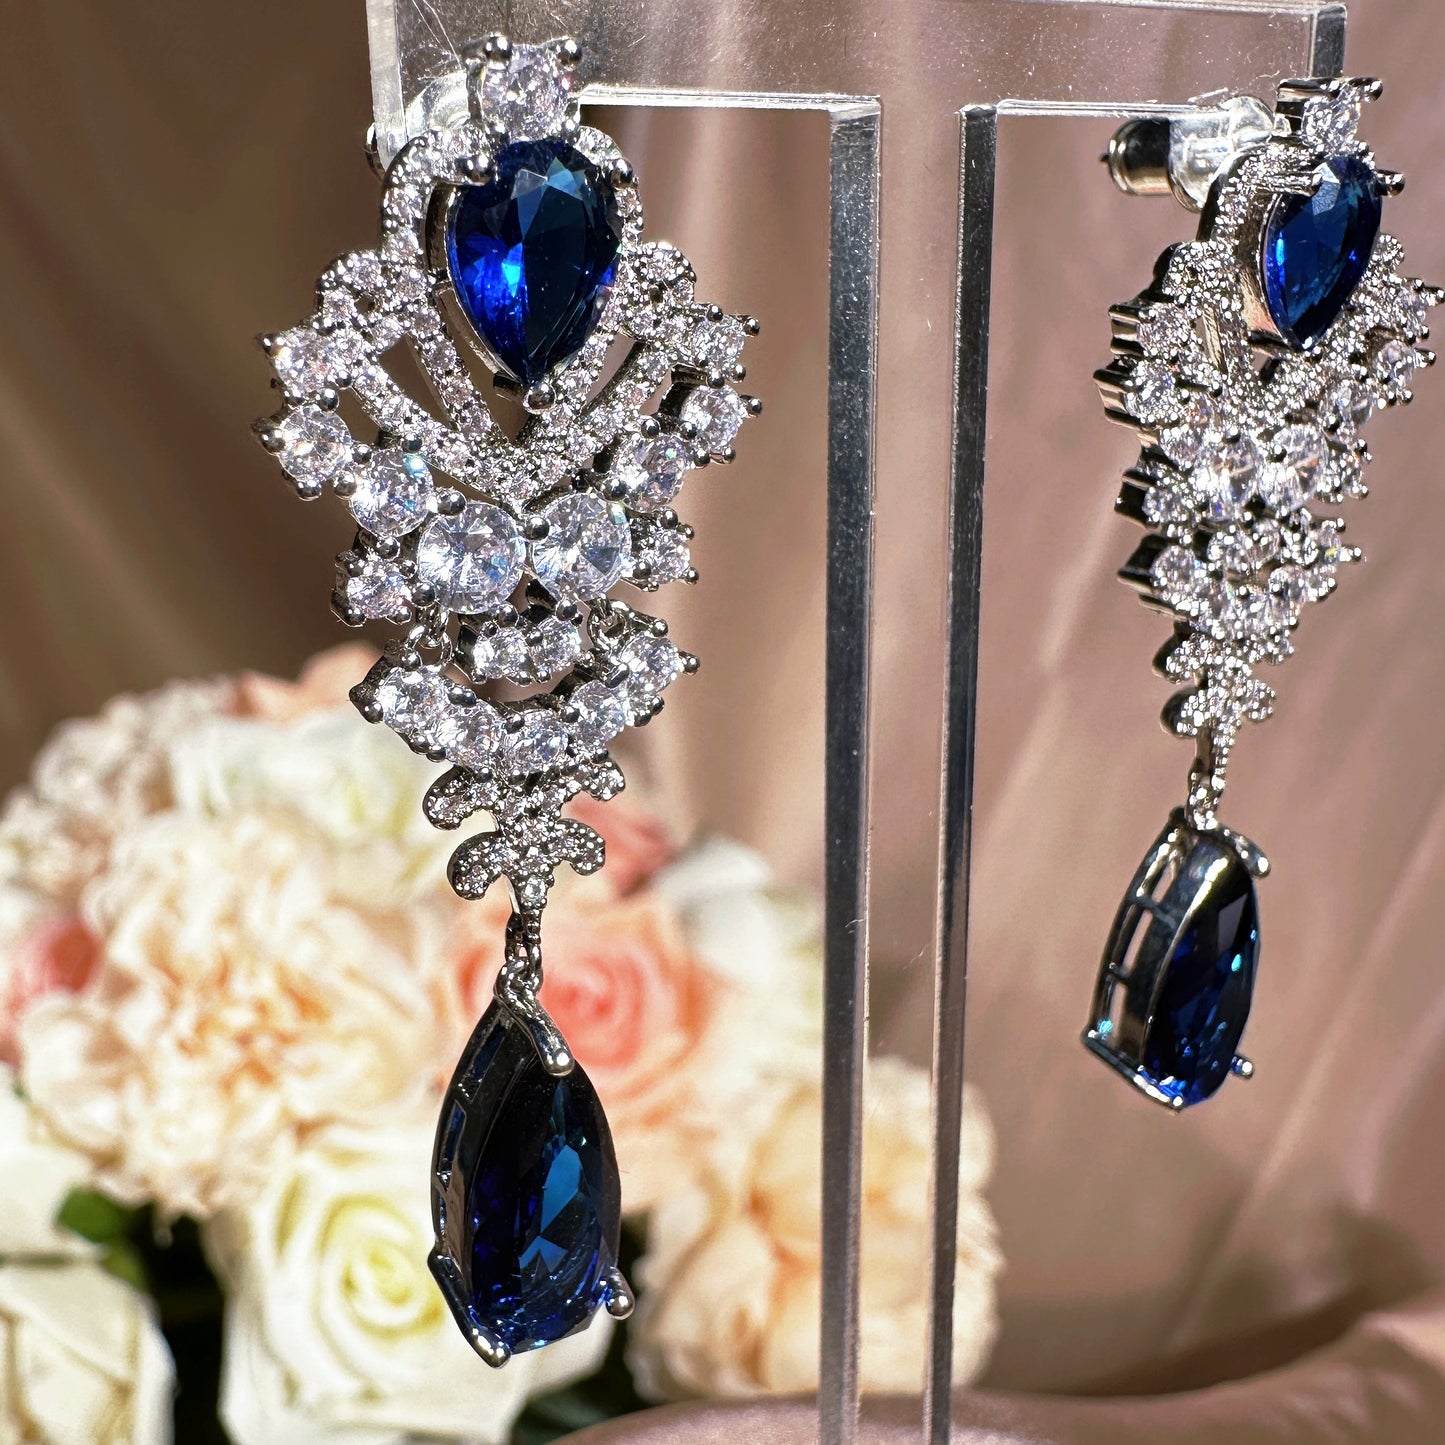 2218347 Vintage-Inspired Cubic Zirconia Drop Earrings with Timeless Elegance